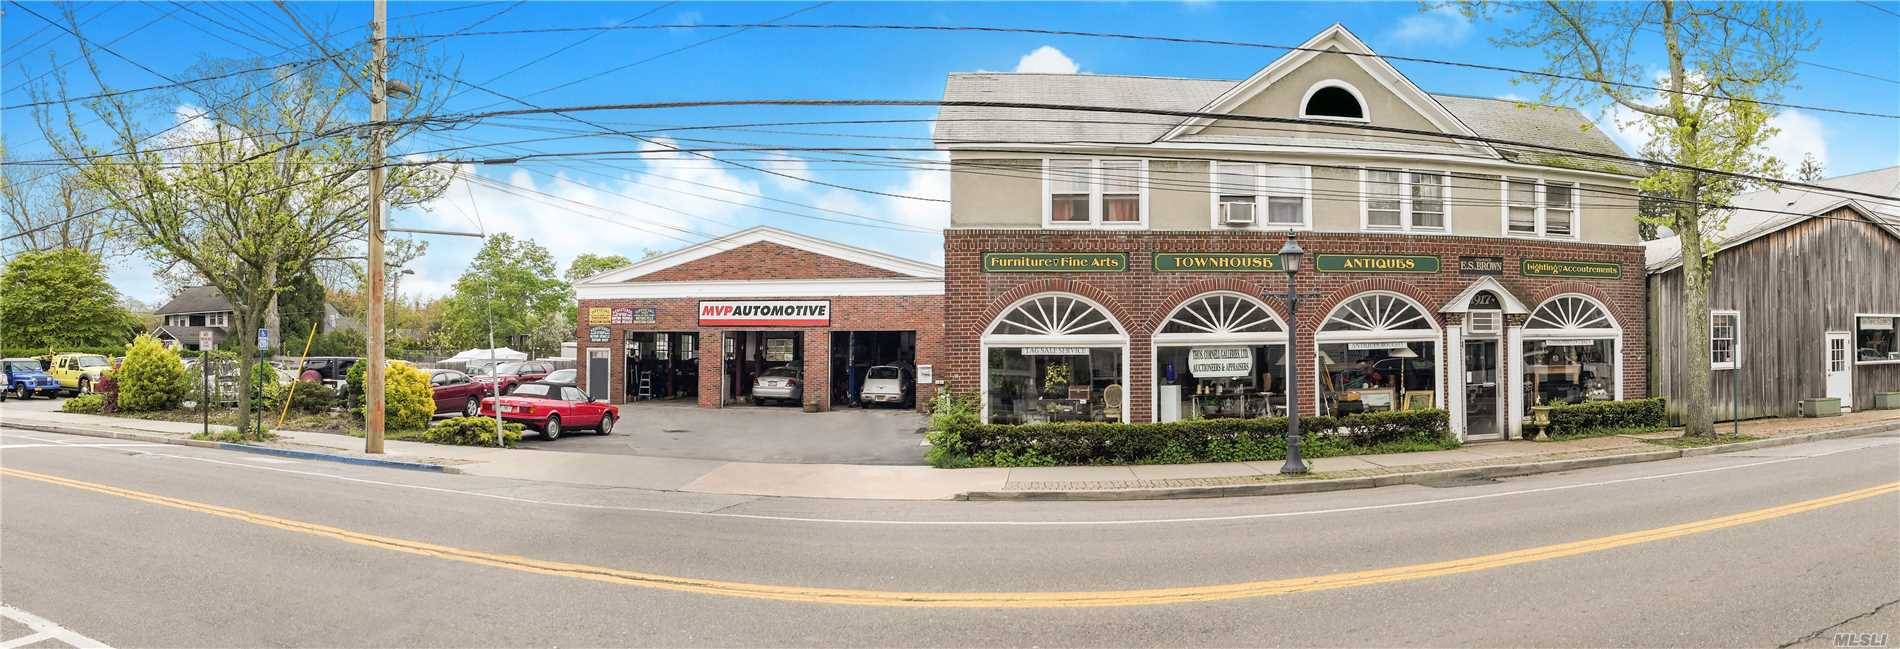 Rare opportunity to own this mixed use property in Bellport Village.